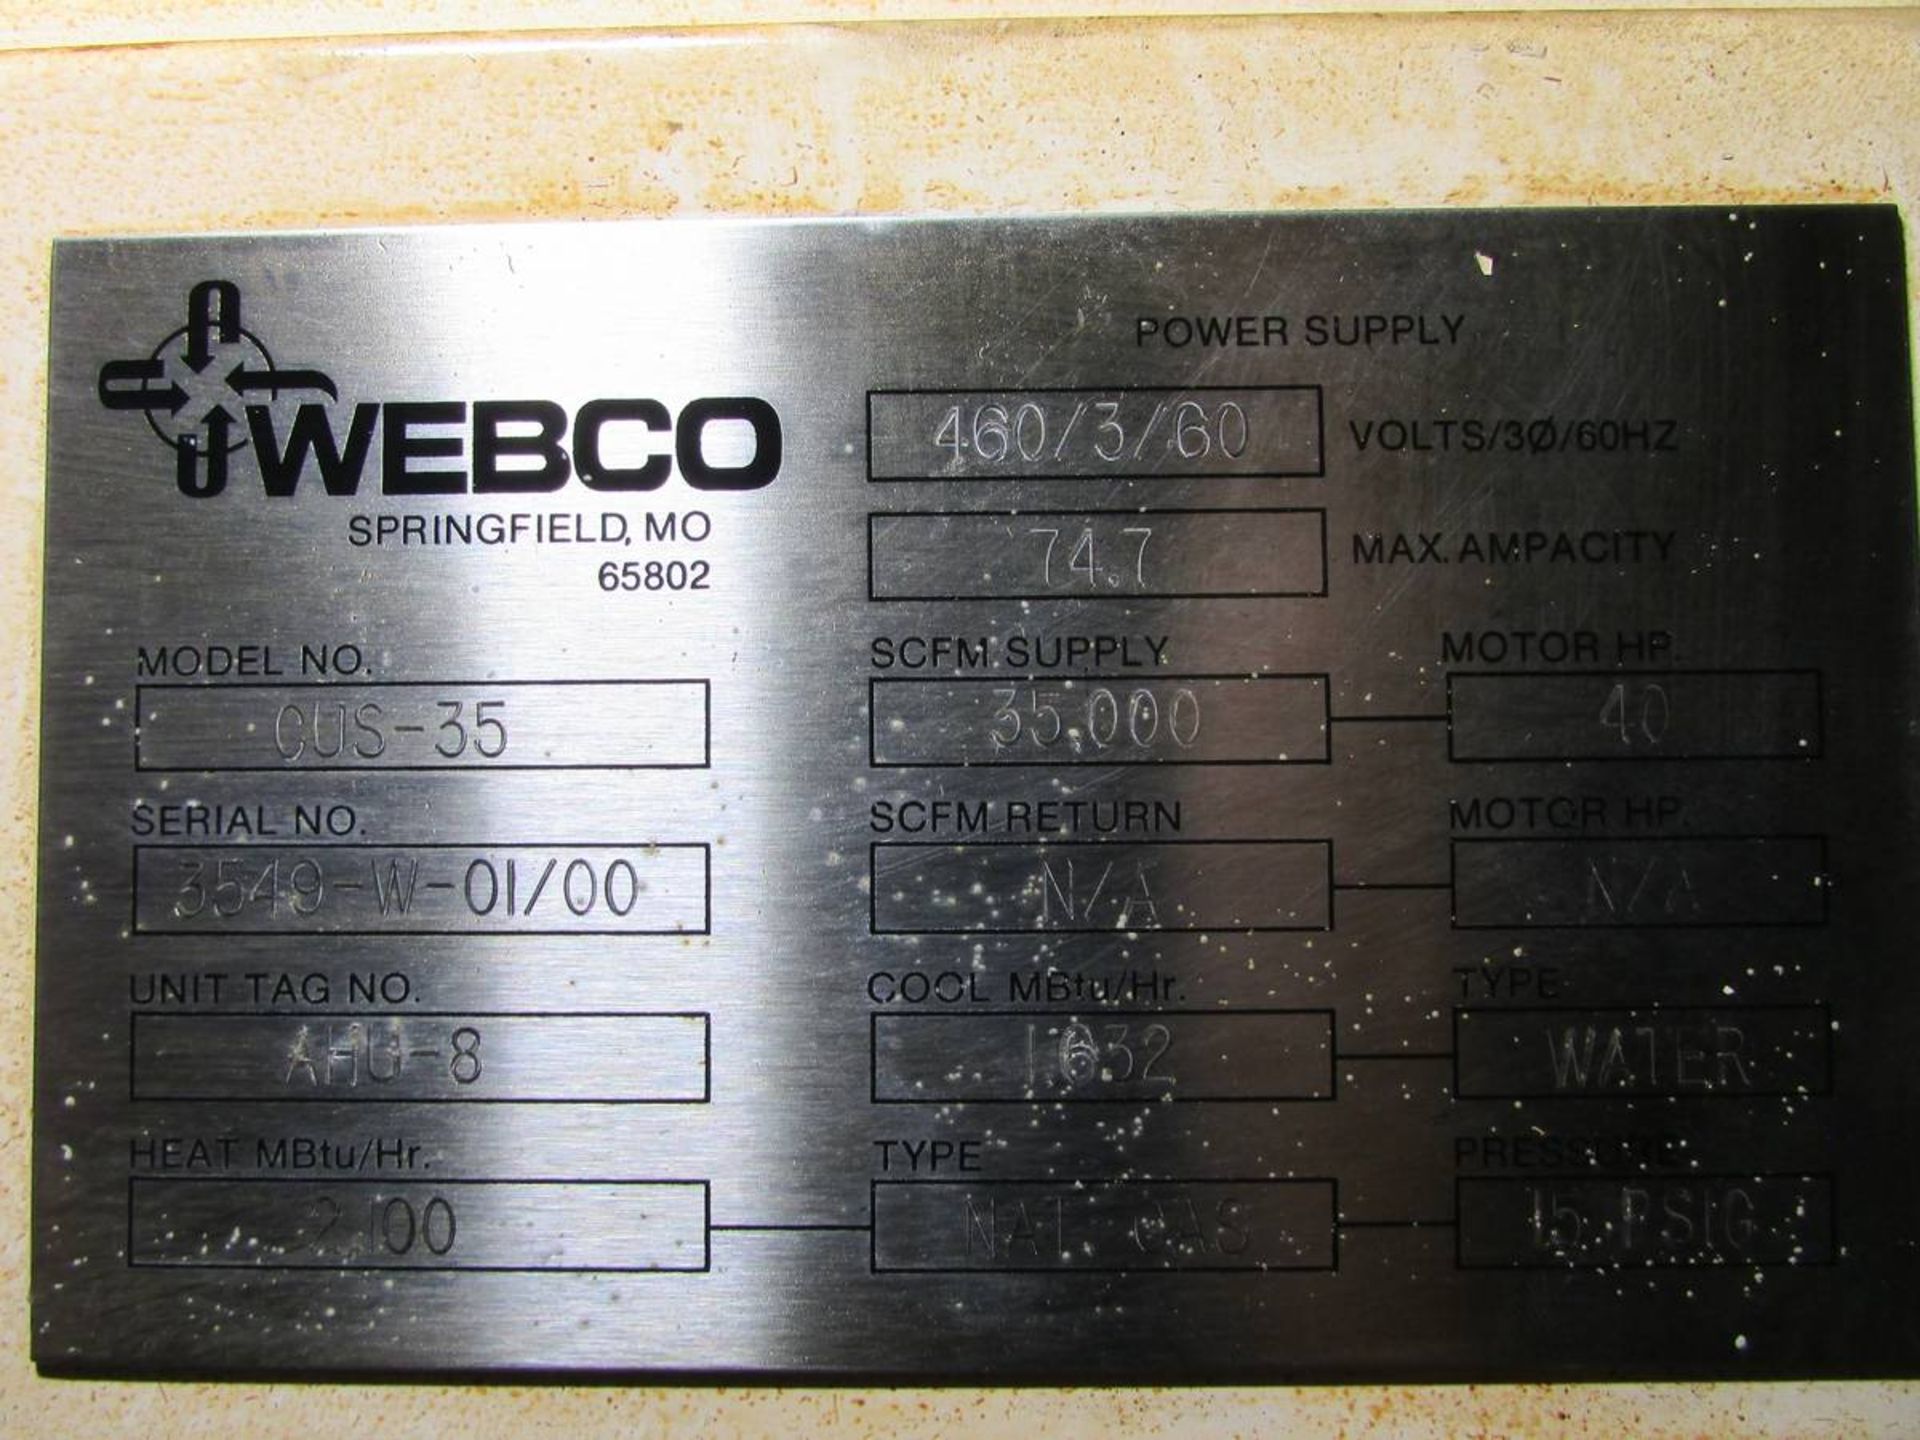 2000 Webco CUS-35 Overhead Air Handling Unit - Image 17 of 17